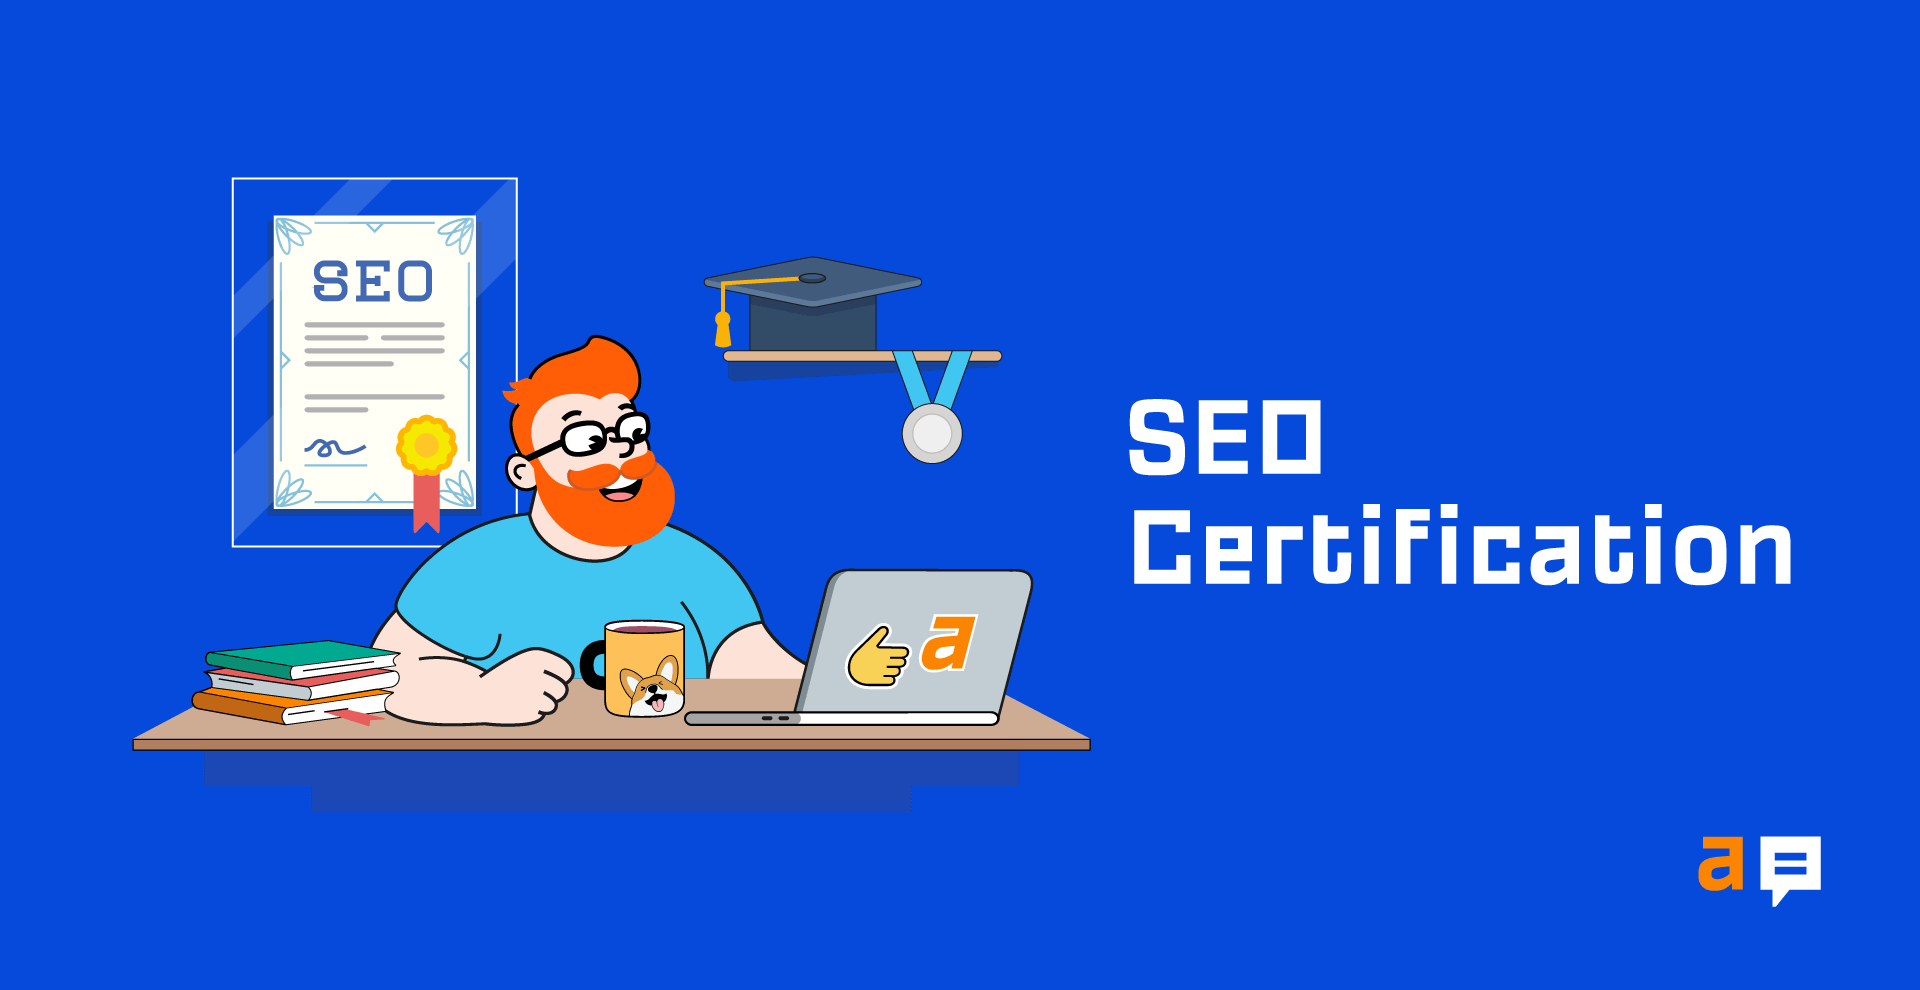 SEO Certifications: Are They Really Worth It?